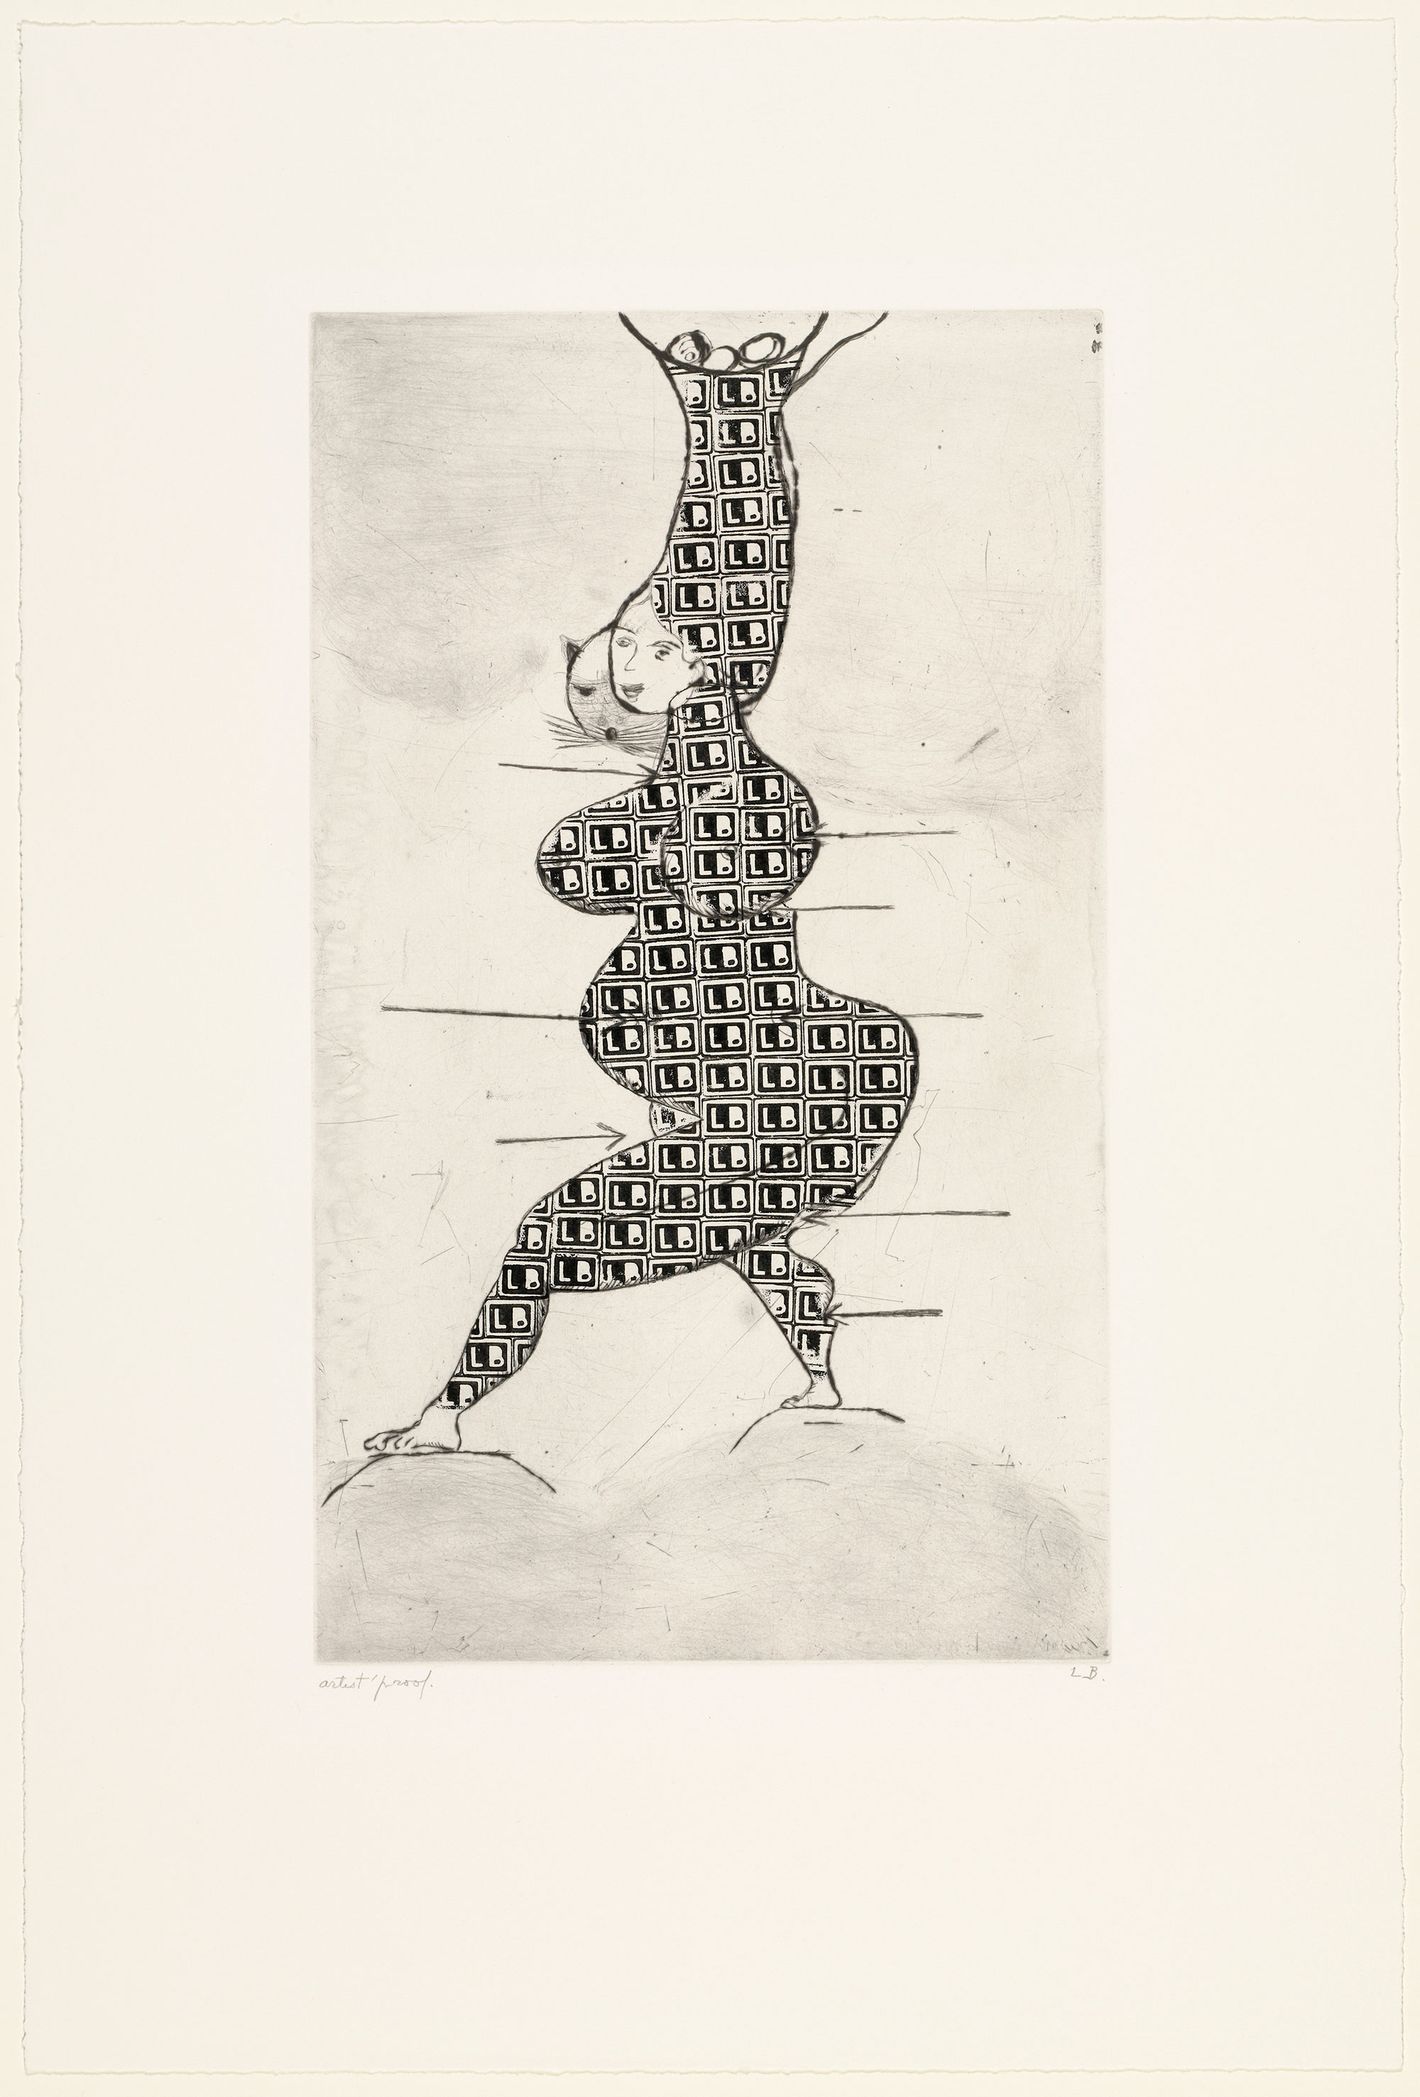 Louise Bourgeois: An Unfolding Portrait” at MoMA Is a Must-See for Women in  the Digital Age